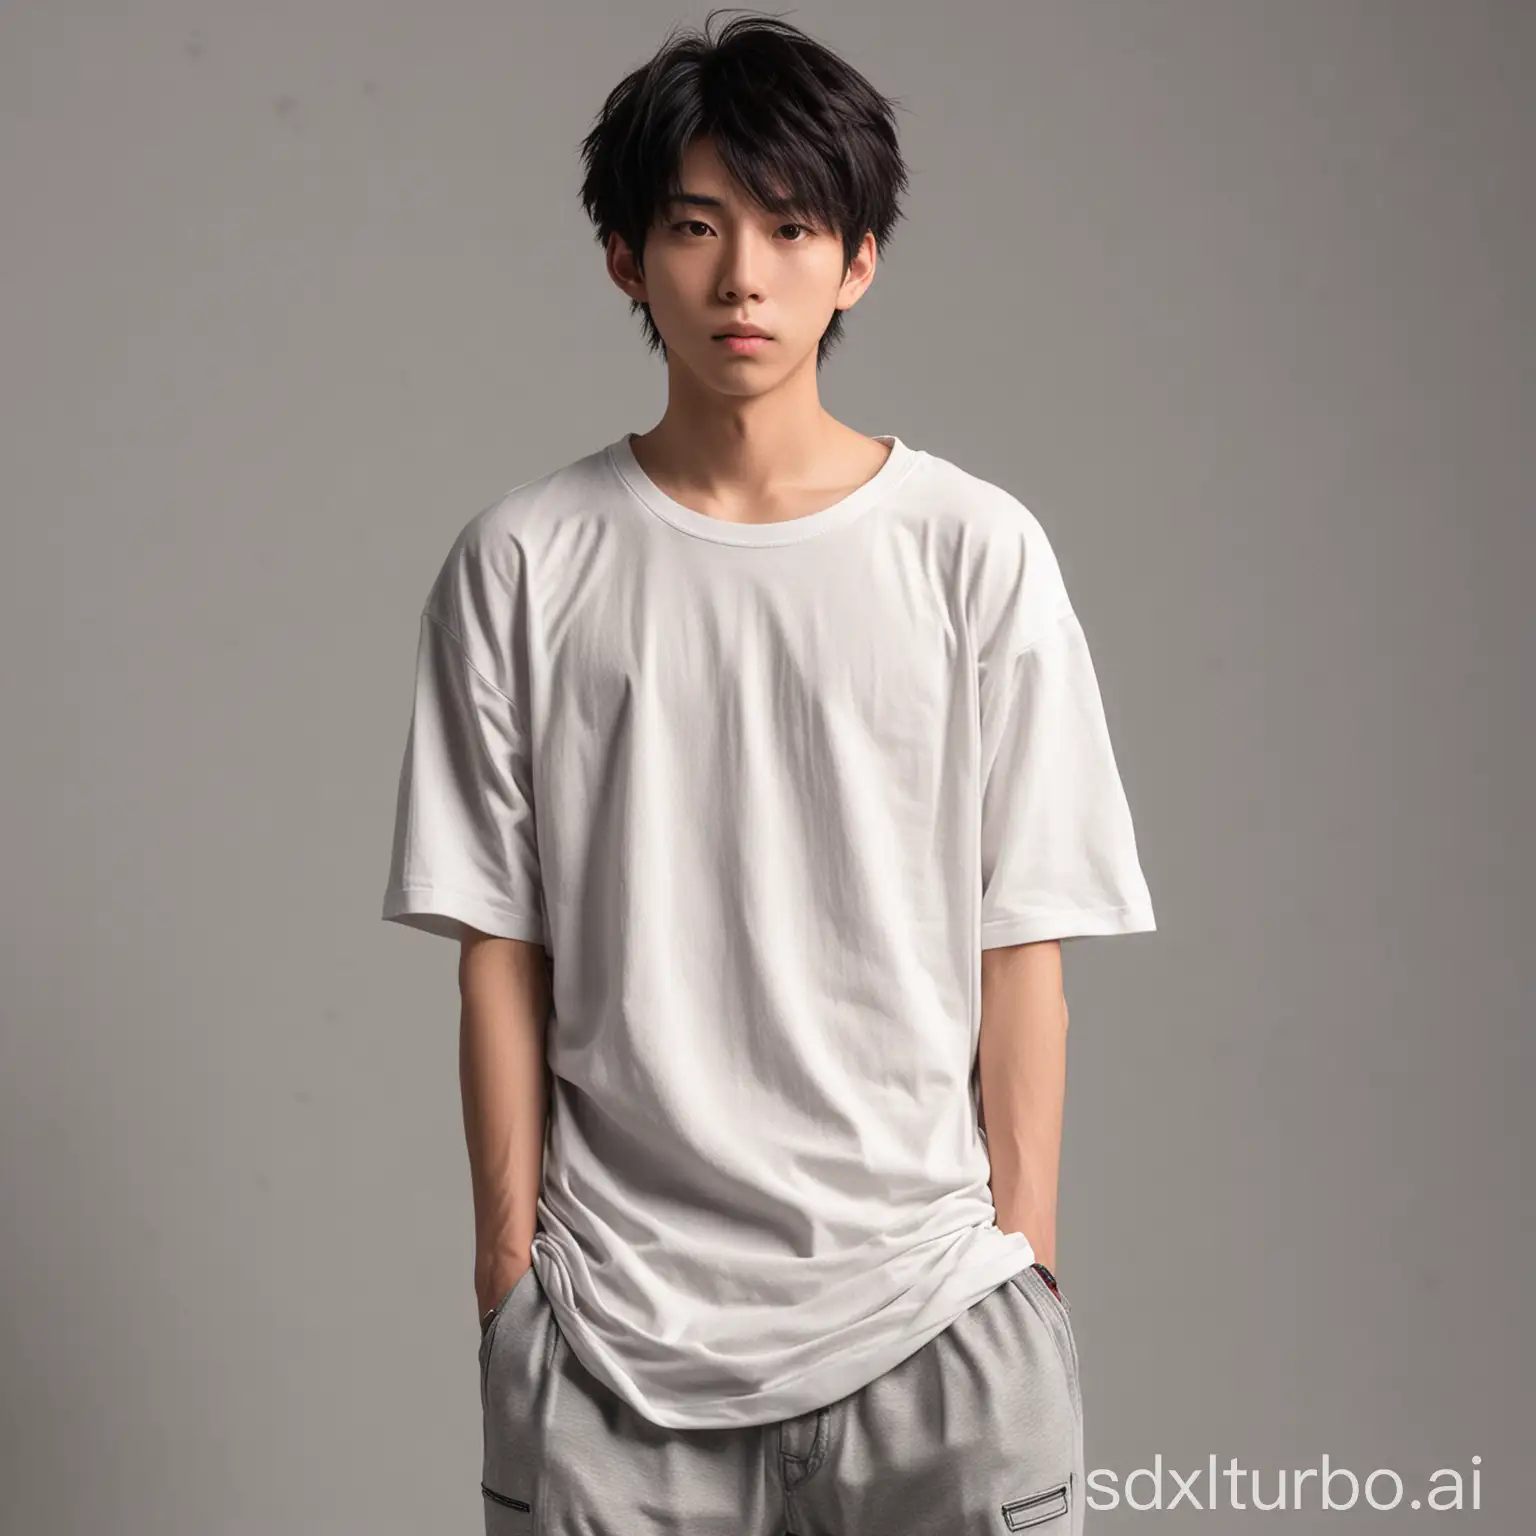 a real life male anime character with good build wearing a plain oversized t shirt posing for a photoshoot